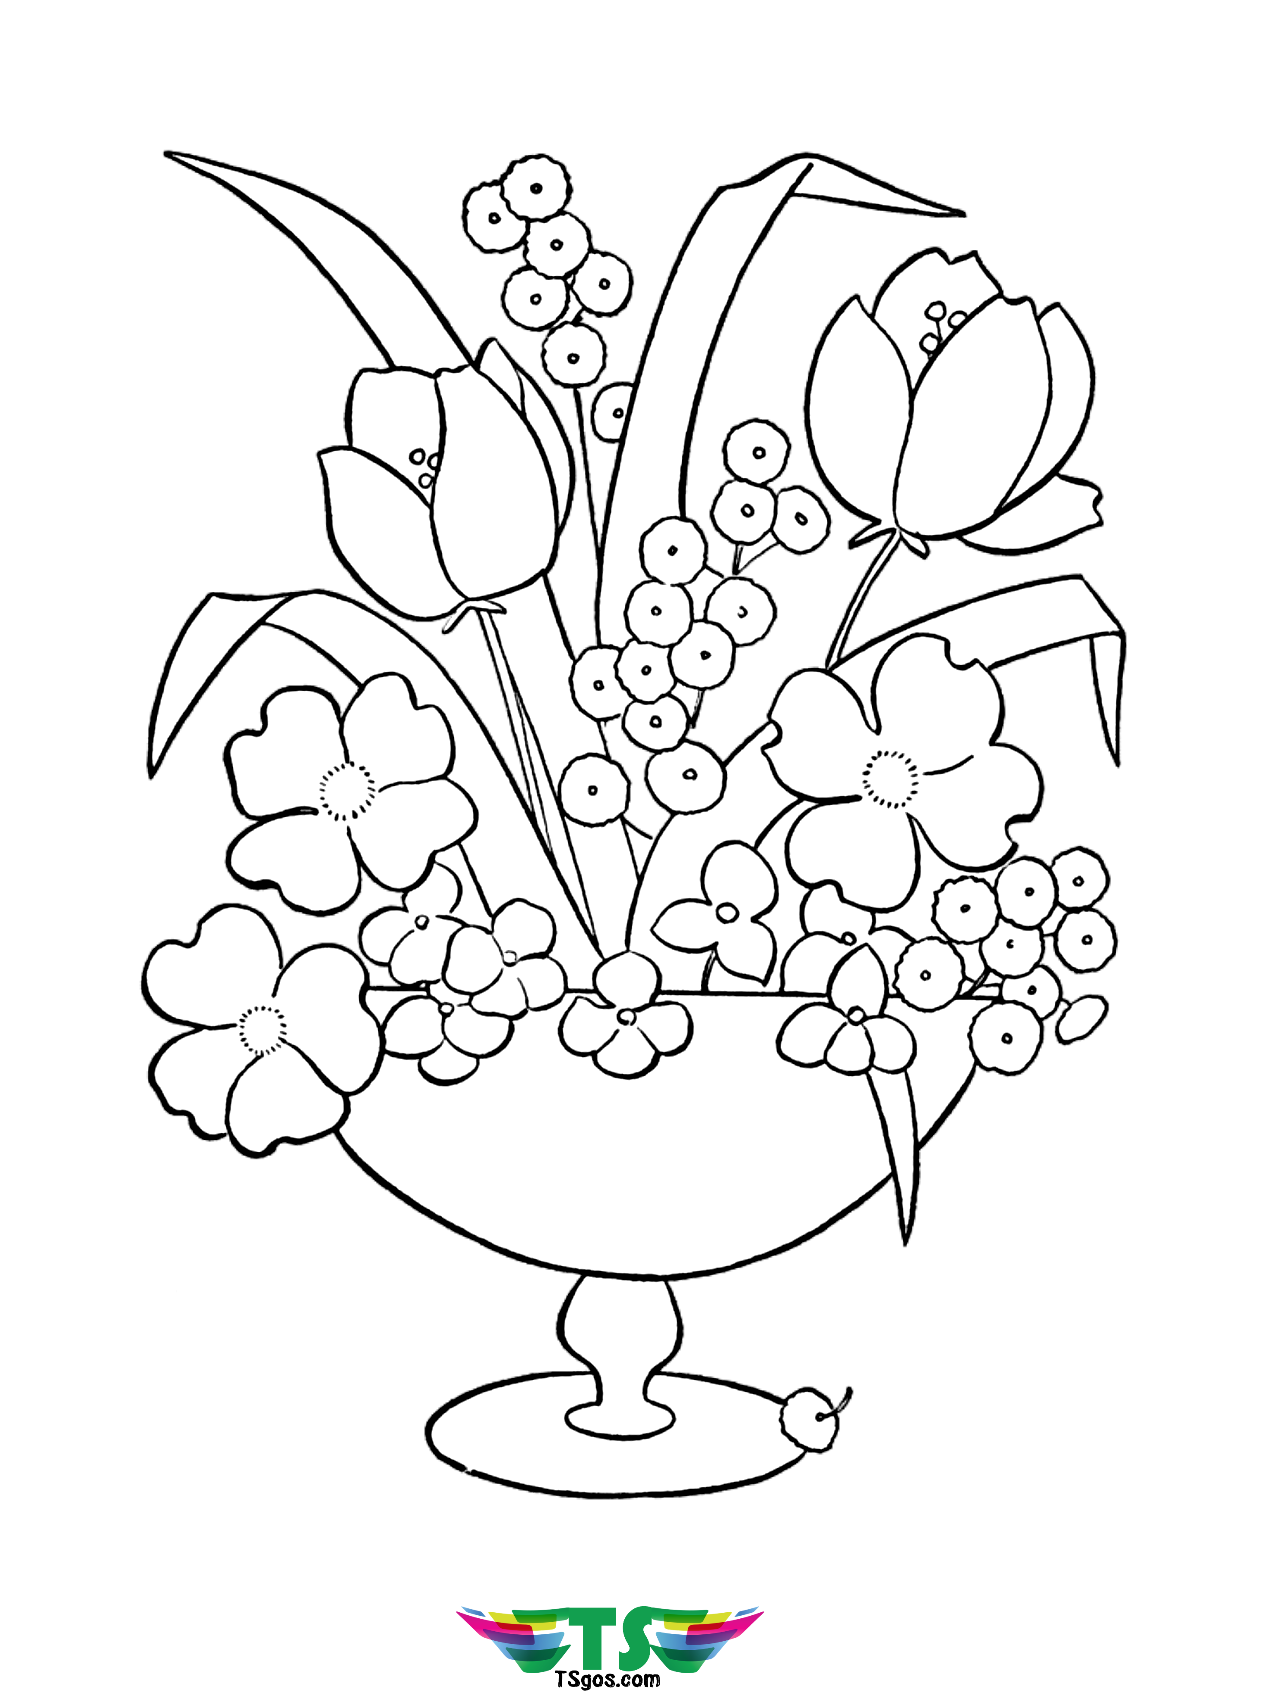 beautiful-flower-coloring-page-free-and-printable-picture-tsgos-tsgos